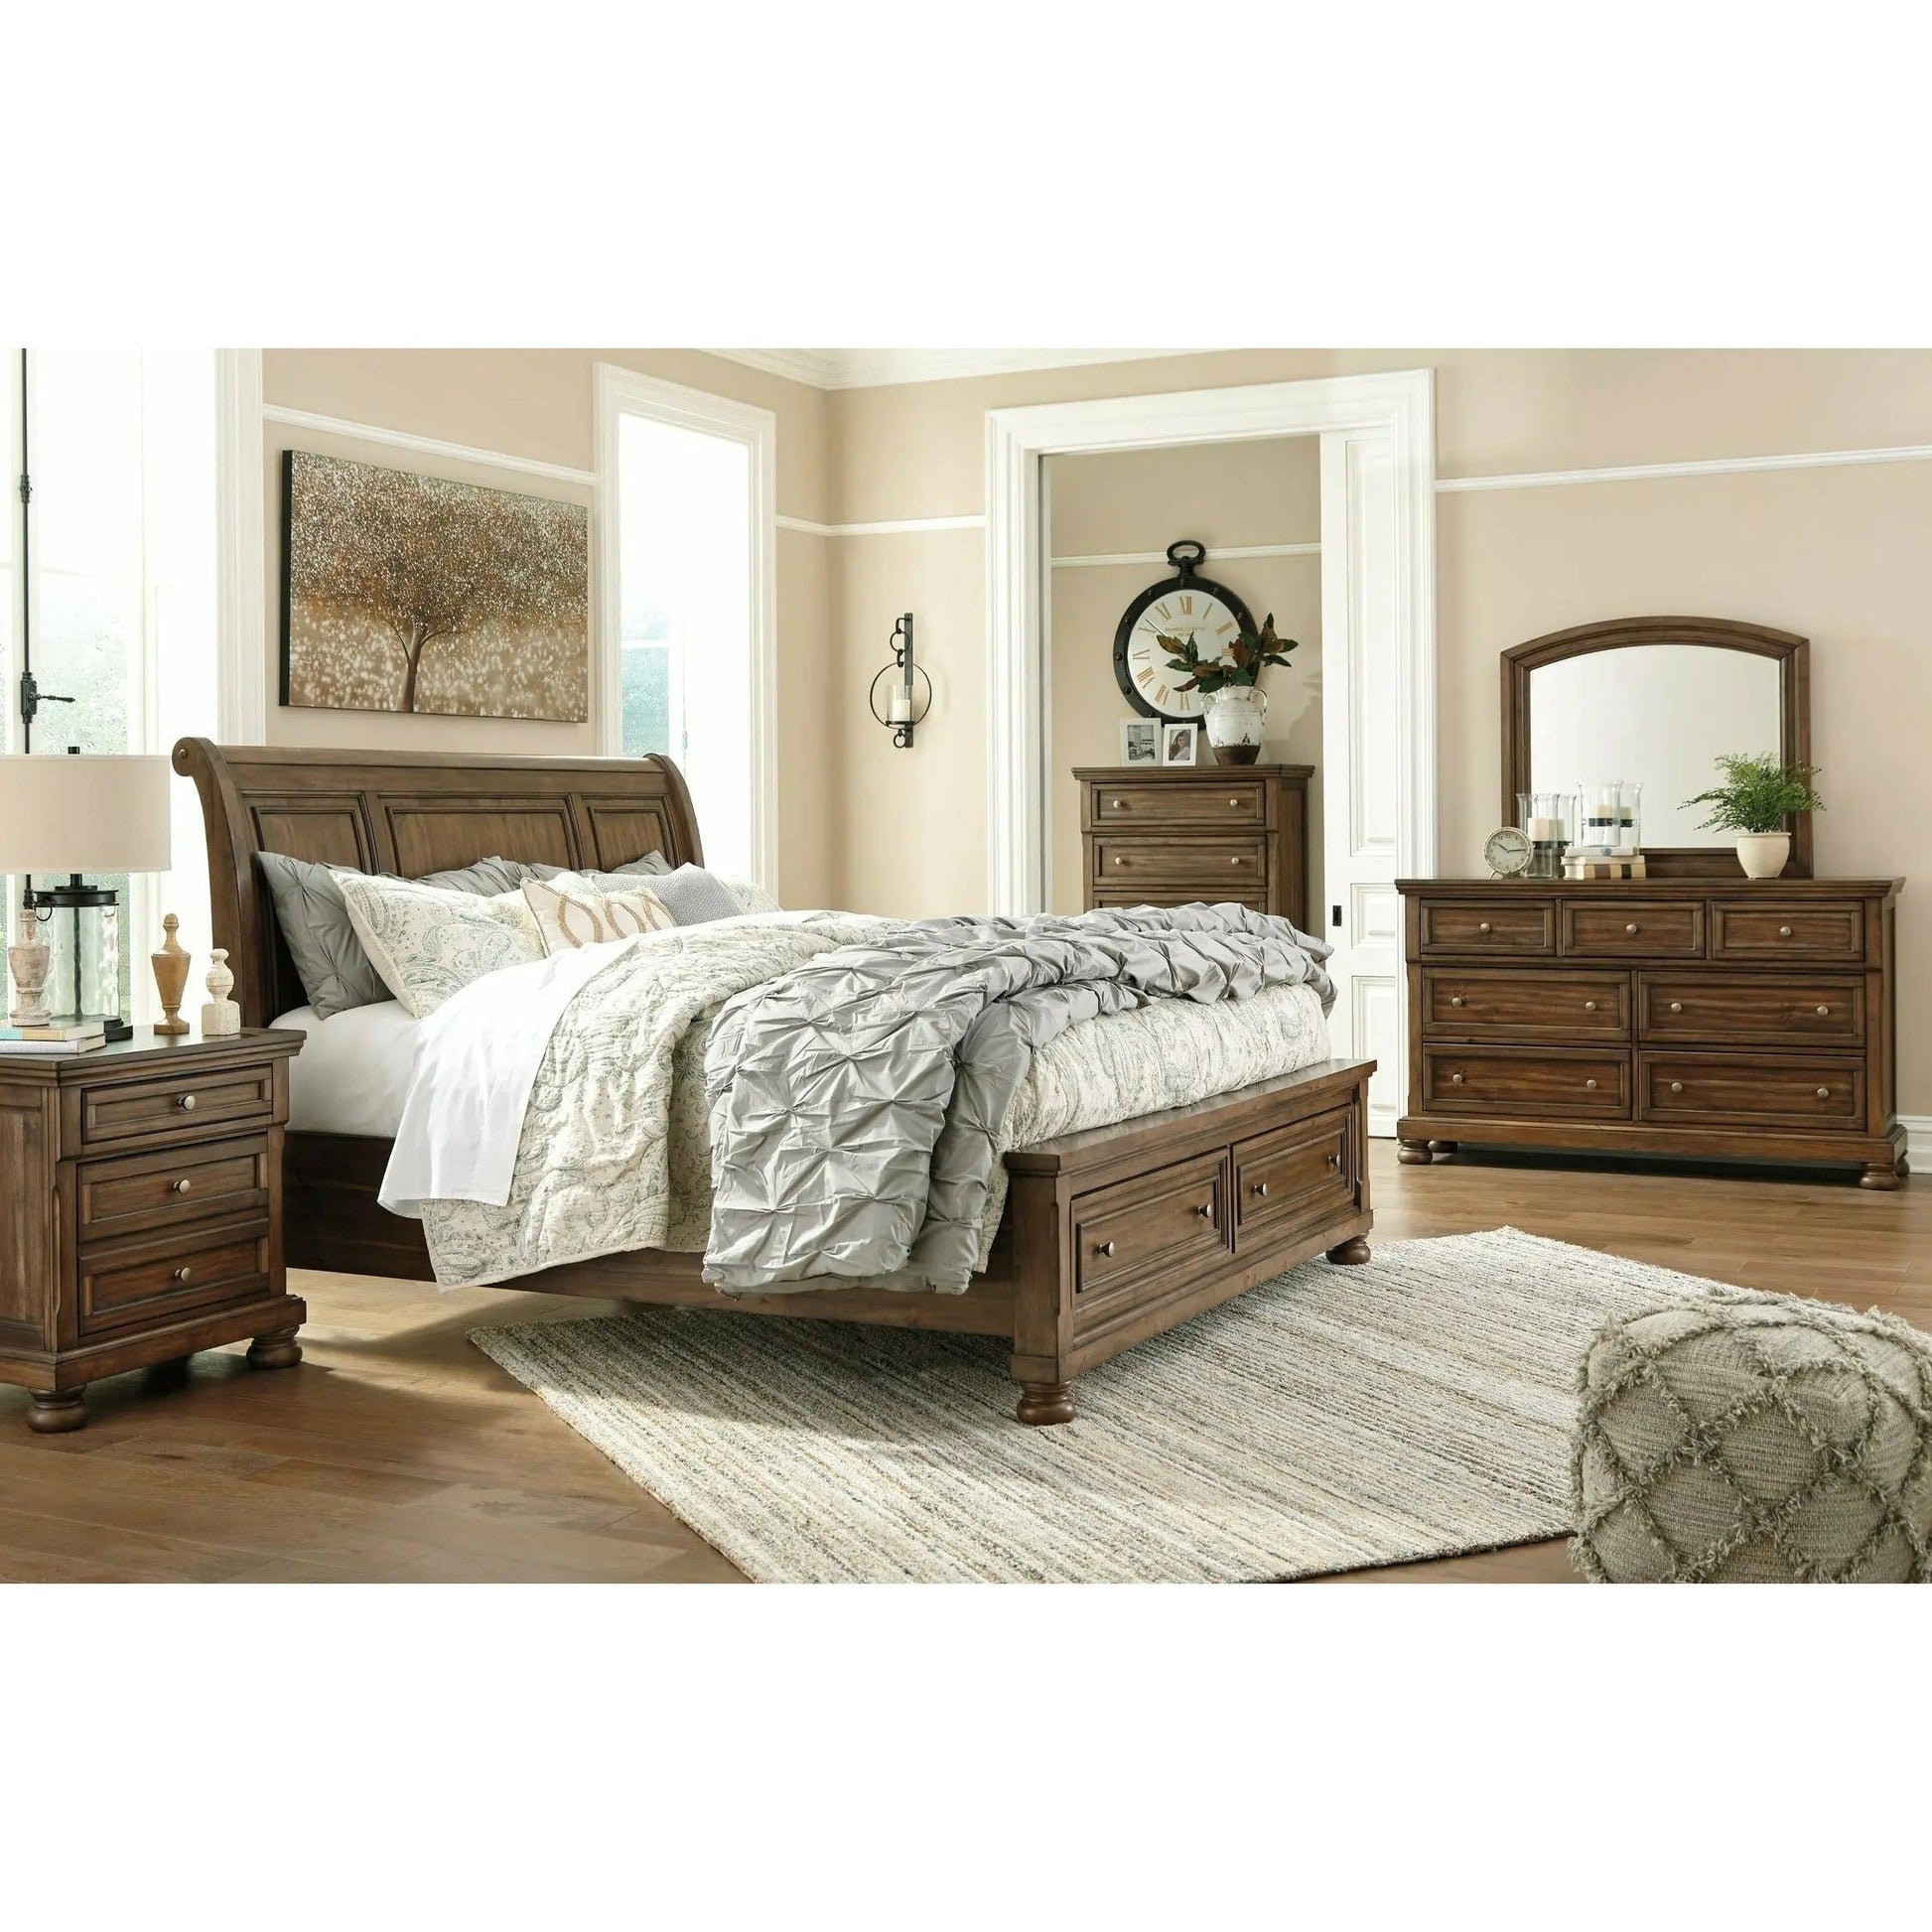 Flynnter Package - Aus King Sleigh Bed with 2 Storage Drawers BED